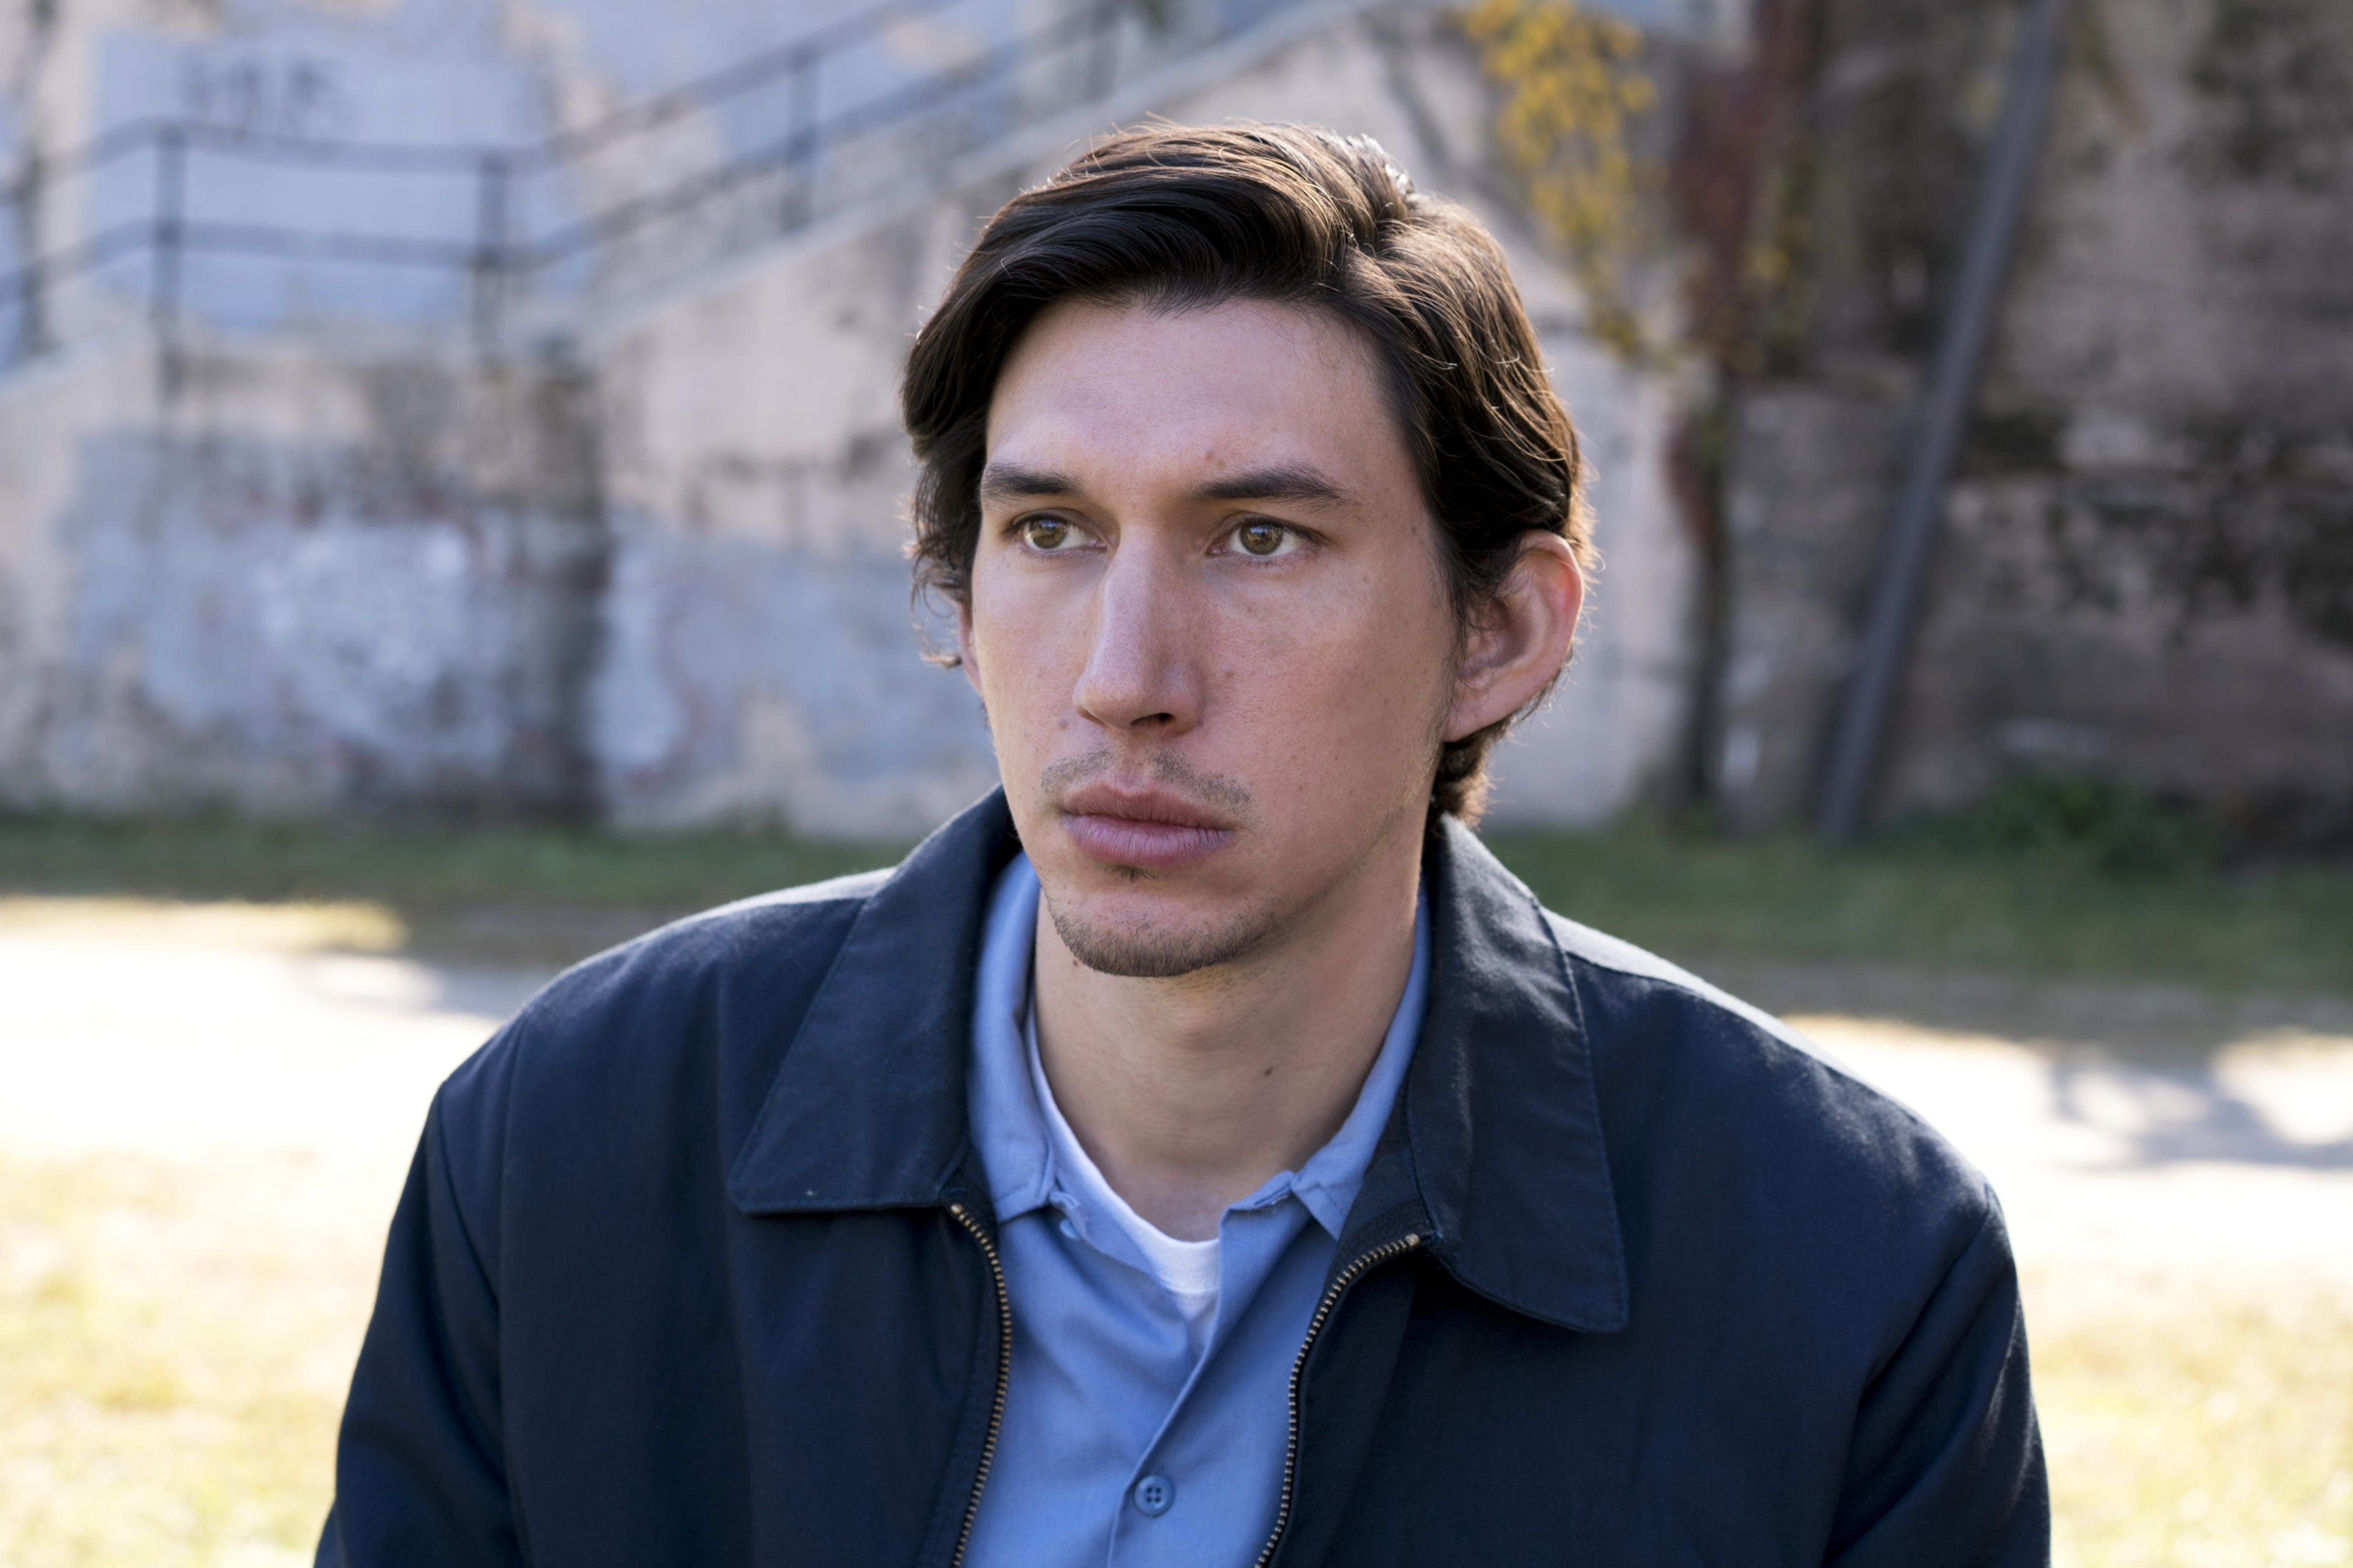 8. Paterson(Paterson): This is one of Adam Driver's best performances in his career. It is a meditative and reflective film. Consequently, Driver does full justice to the movie with the stillness and thoughtfulness he portrays onscreen.